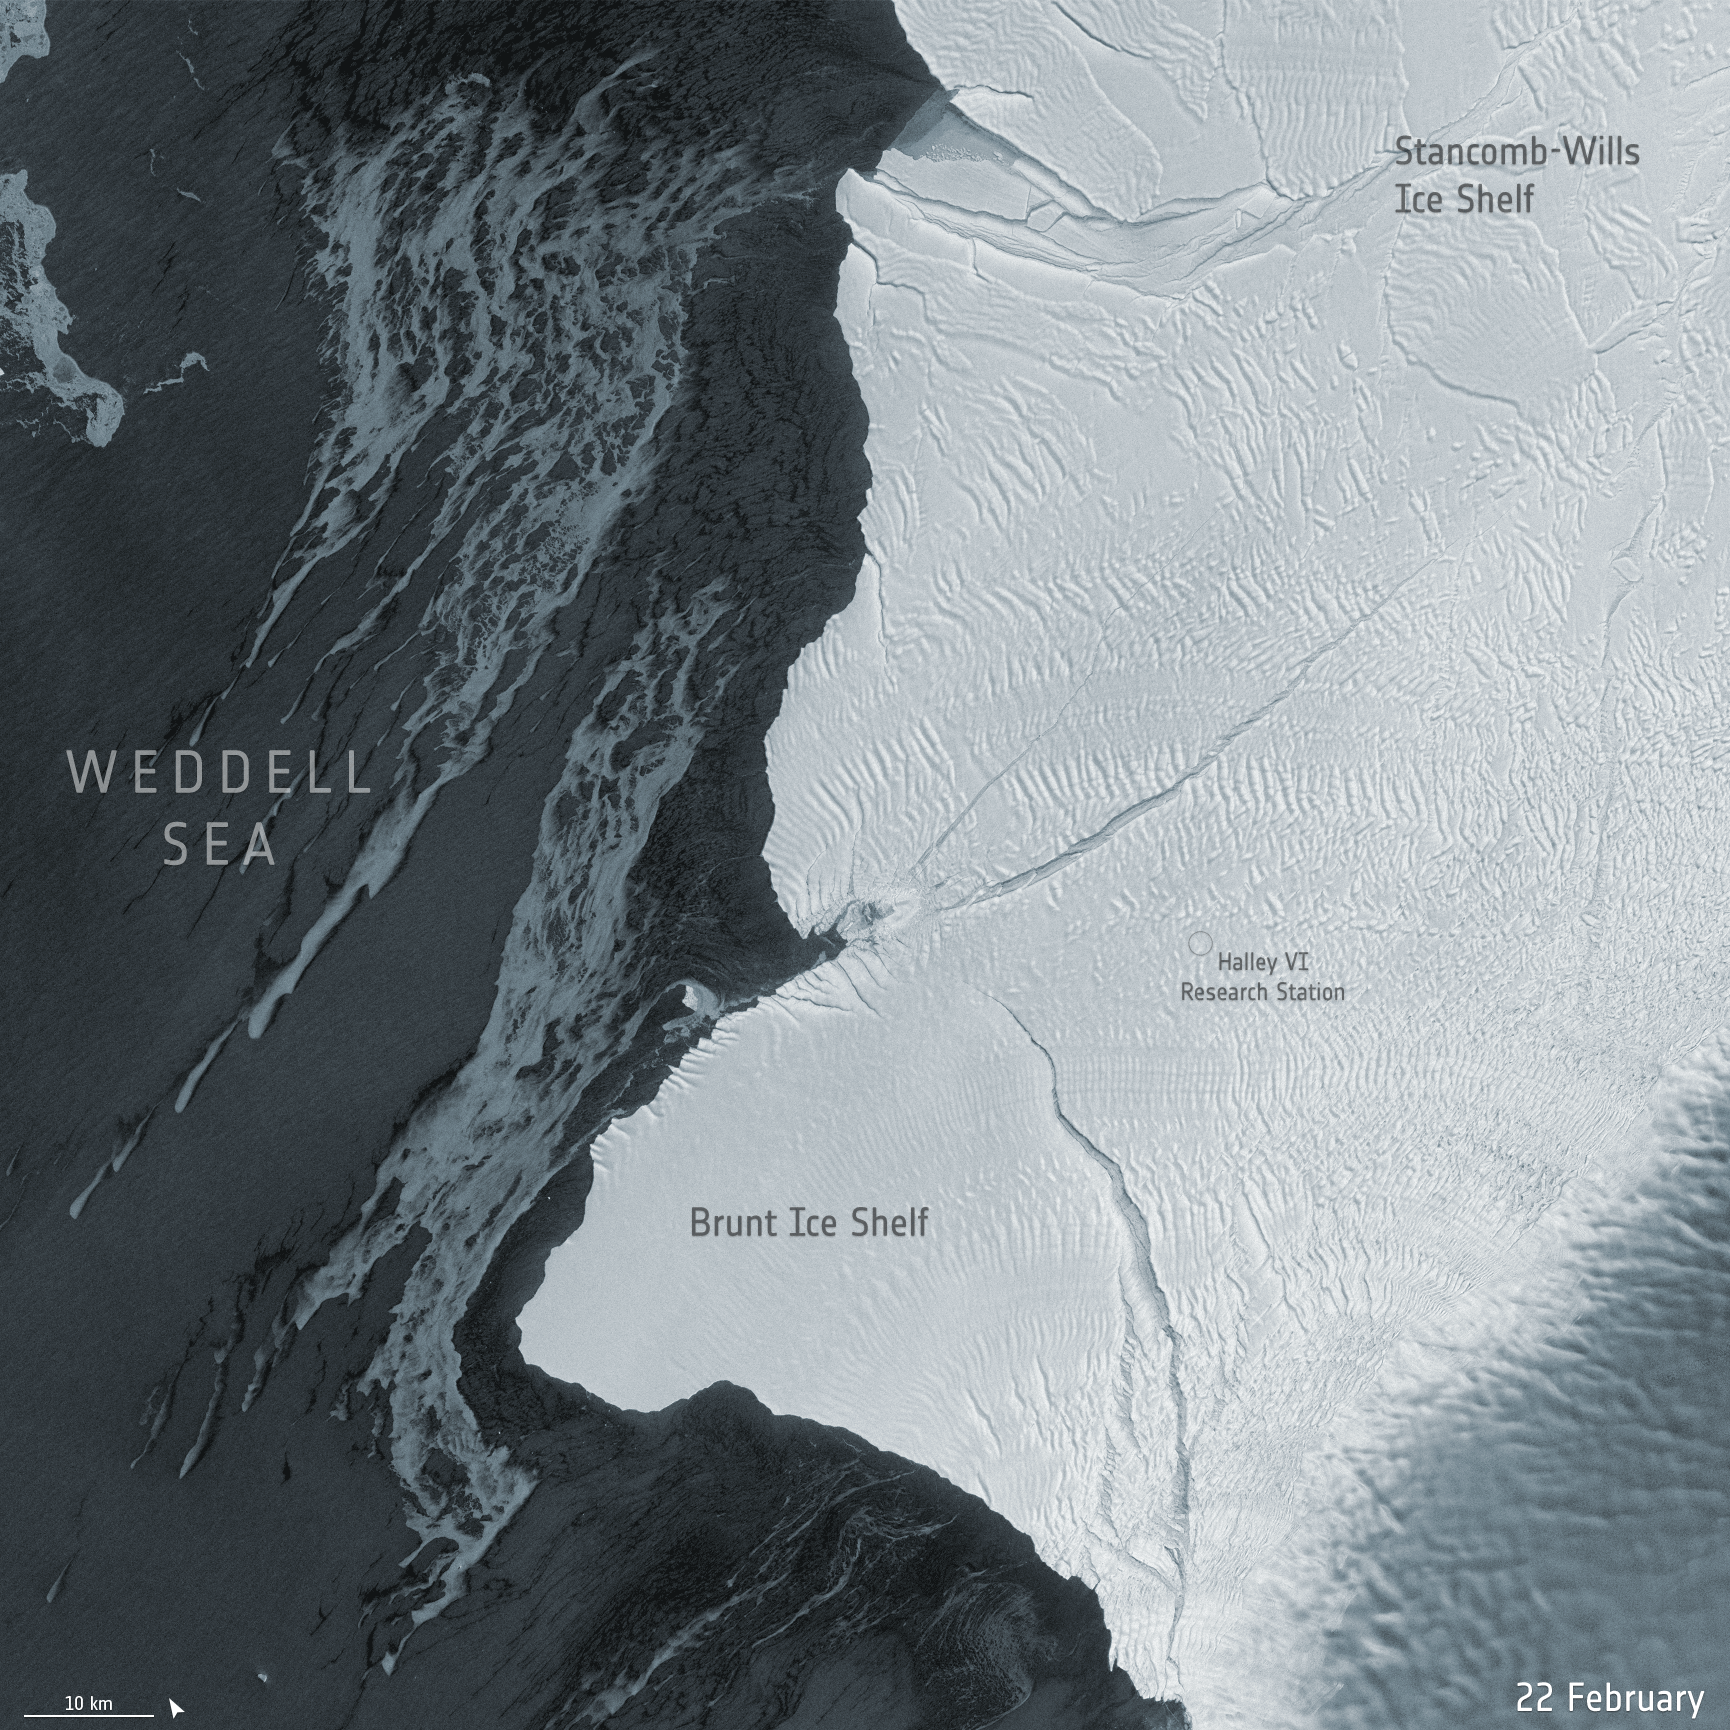 Here we see satellite photos from March 2021 showing calving of A-74. Notice the crack on the lower part of the Brunt Ice Shelf, which has now broken off into a new iceberg. The new position of Halley Base is also visible.